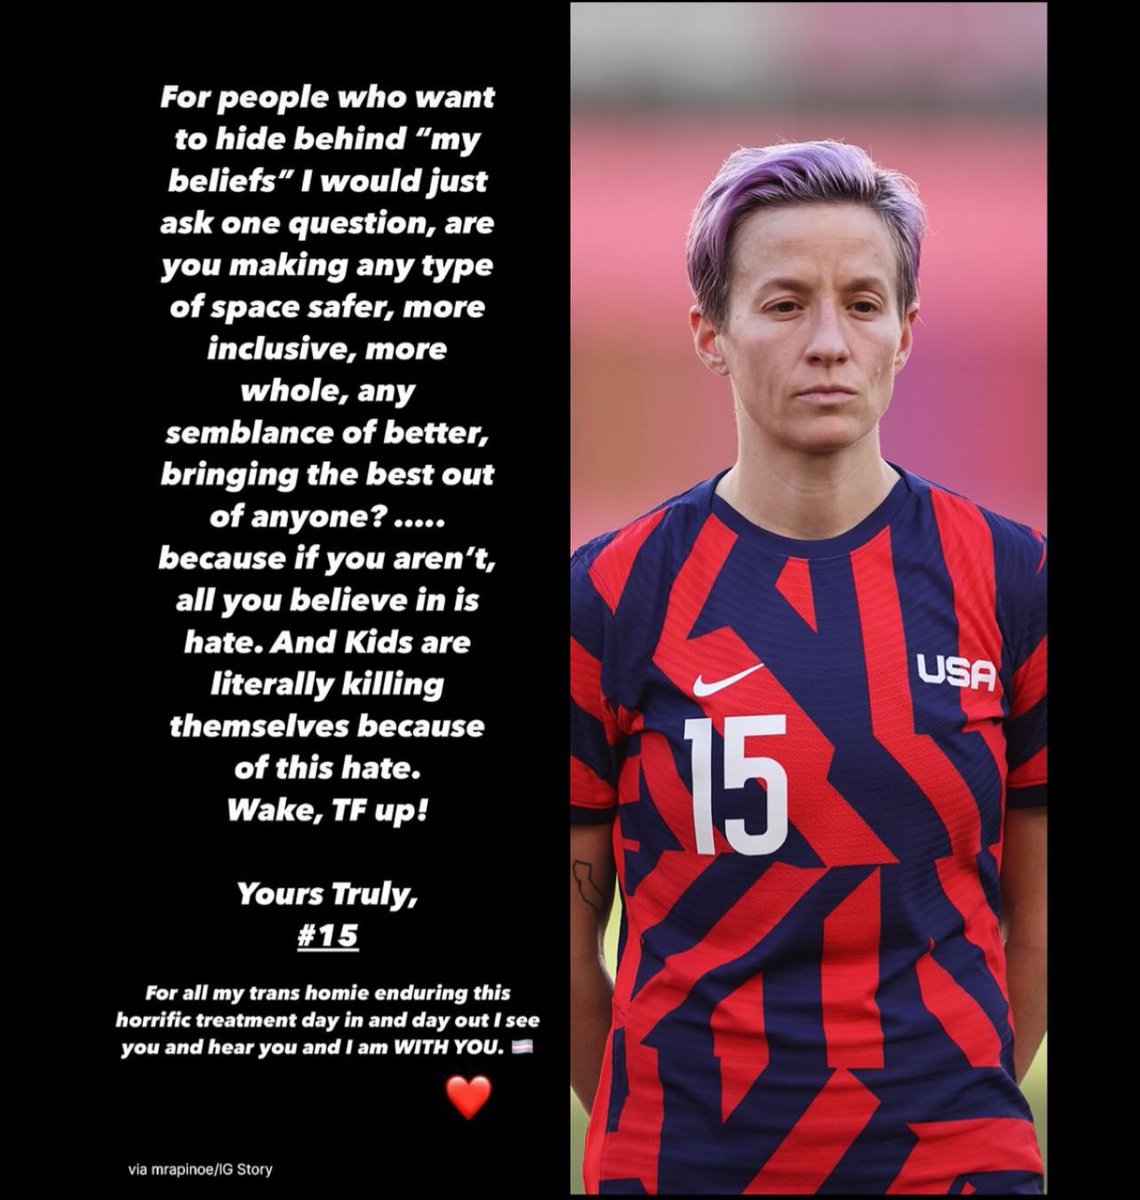 . @mPinoe’s words apply not just to the disappointing USWNT player currently signing her name to & putting her weight behind the hatred/bigotry in our society, but to anyone who tries to defend their hate by pretending it's 'faith.' If u aren't preaching LOVE you've been misled.